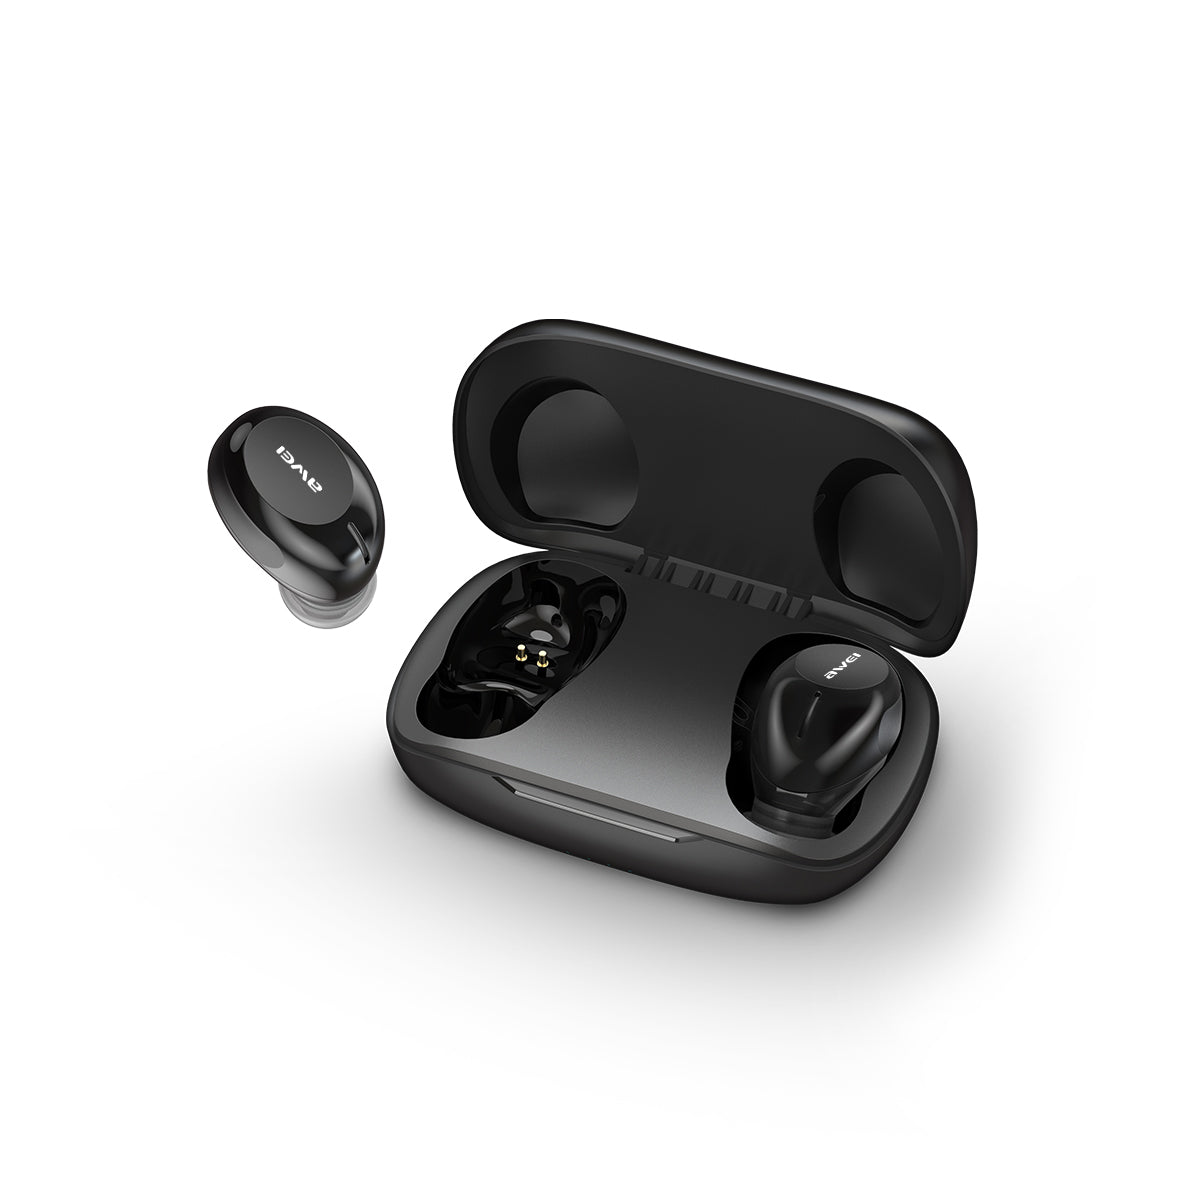 Wireless Earbuds,Bluetooth 5.0 Headphones in Ear with Charging Case, Hands-Free Headset with Mic, Touch Control, 40 Hours Playback for IOS and Android